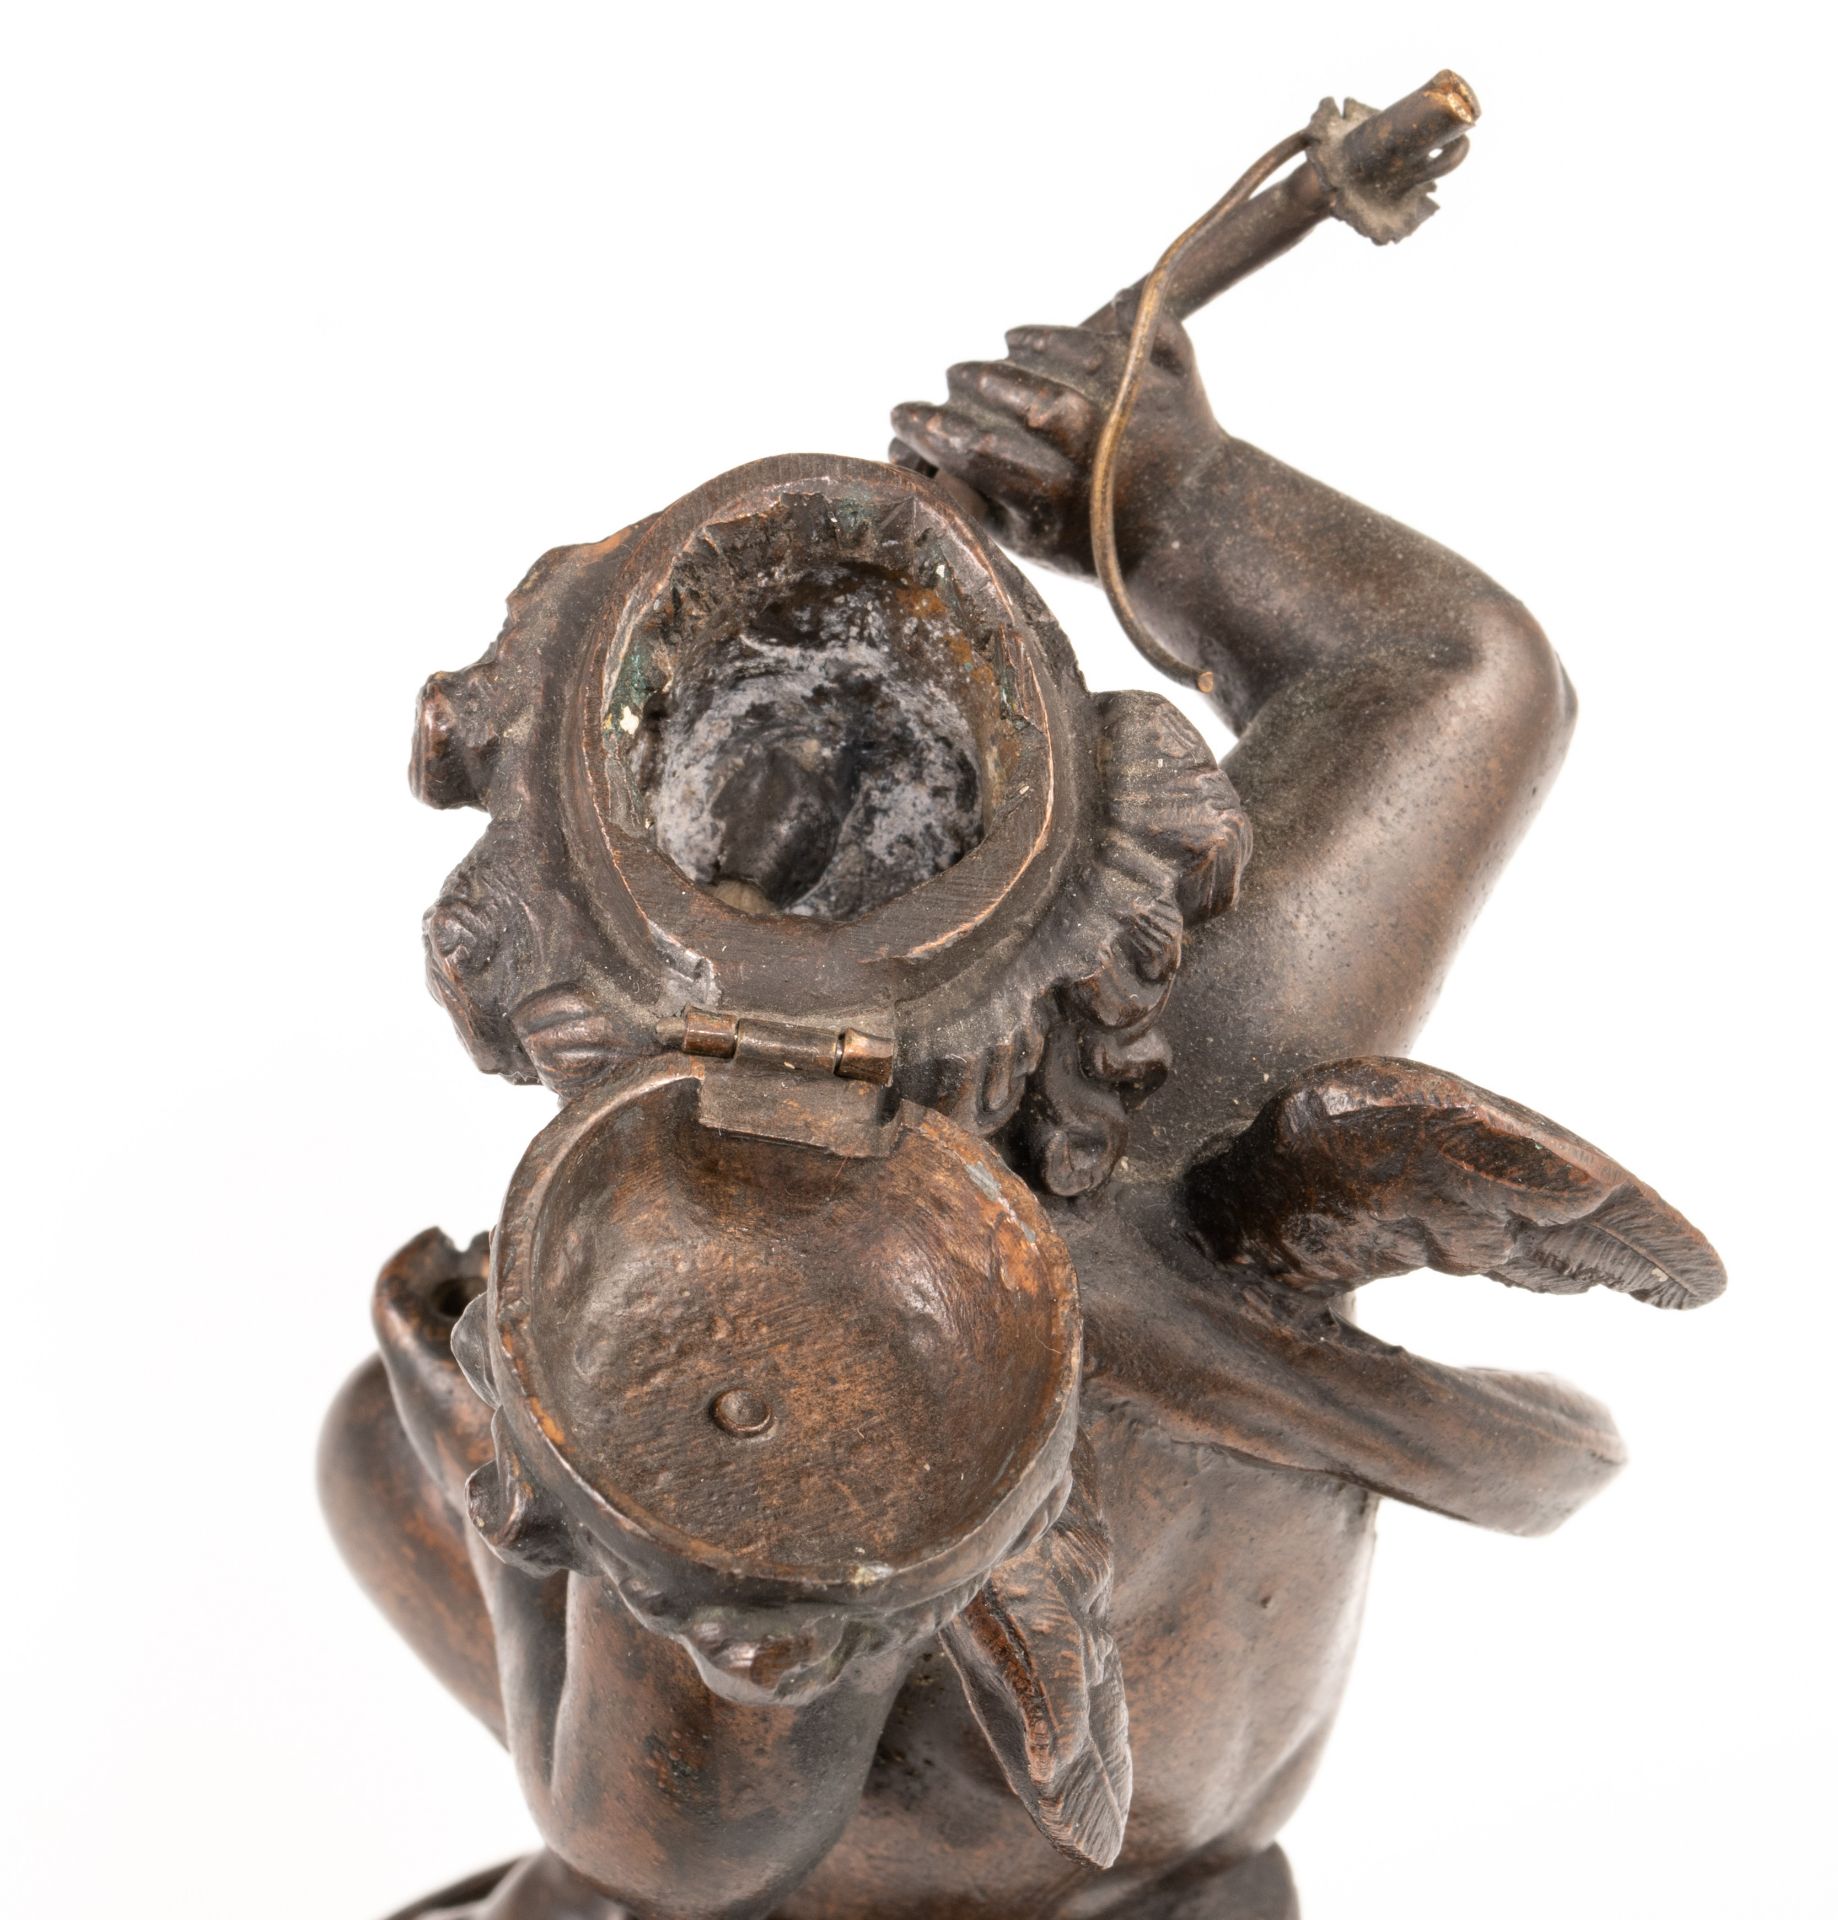 (BIDDING ONLY ON CARLOBONTE.BE) Two patinated bronze Amor figures, H 9,5 - 19 cm - Image 12 of 13